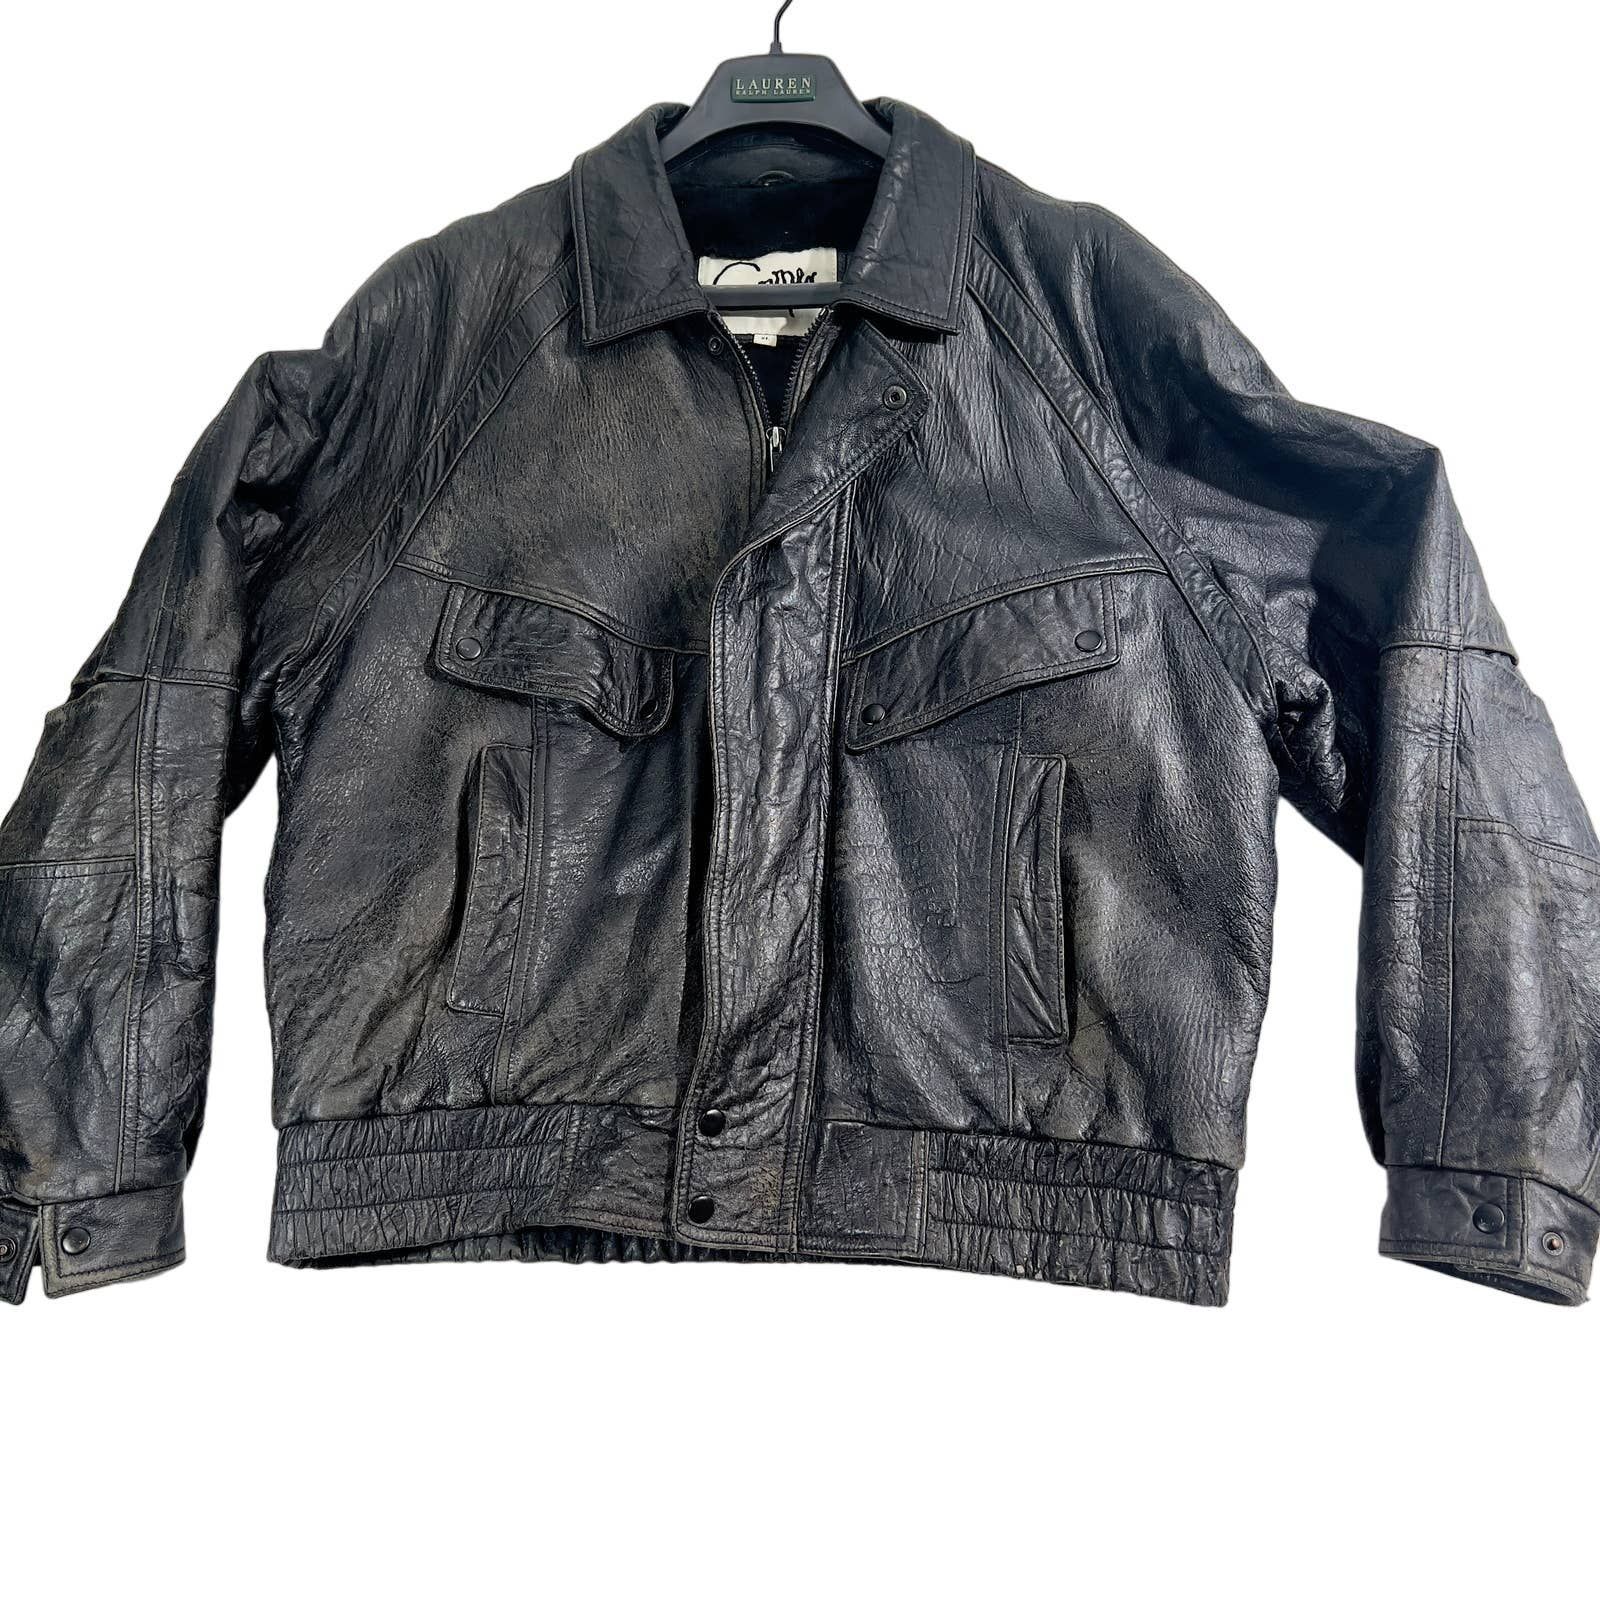 Cooper Cooper Collections Leather Bomber Jacket XL Full Zip DISTRES ...